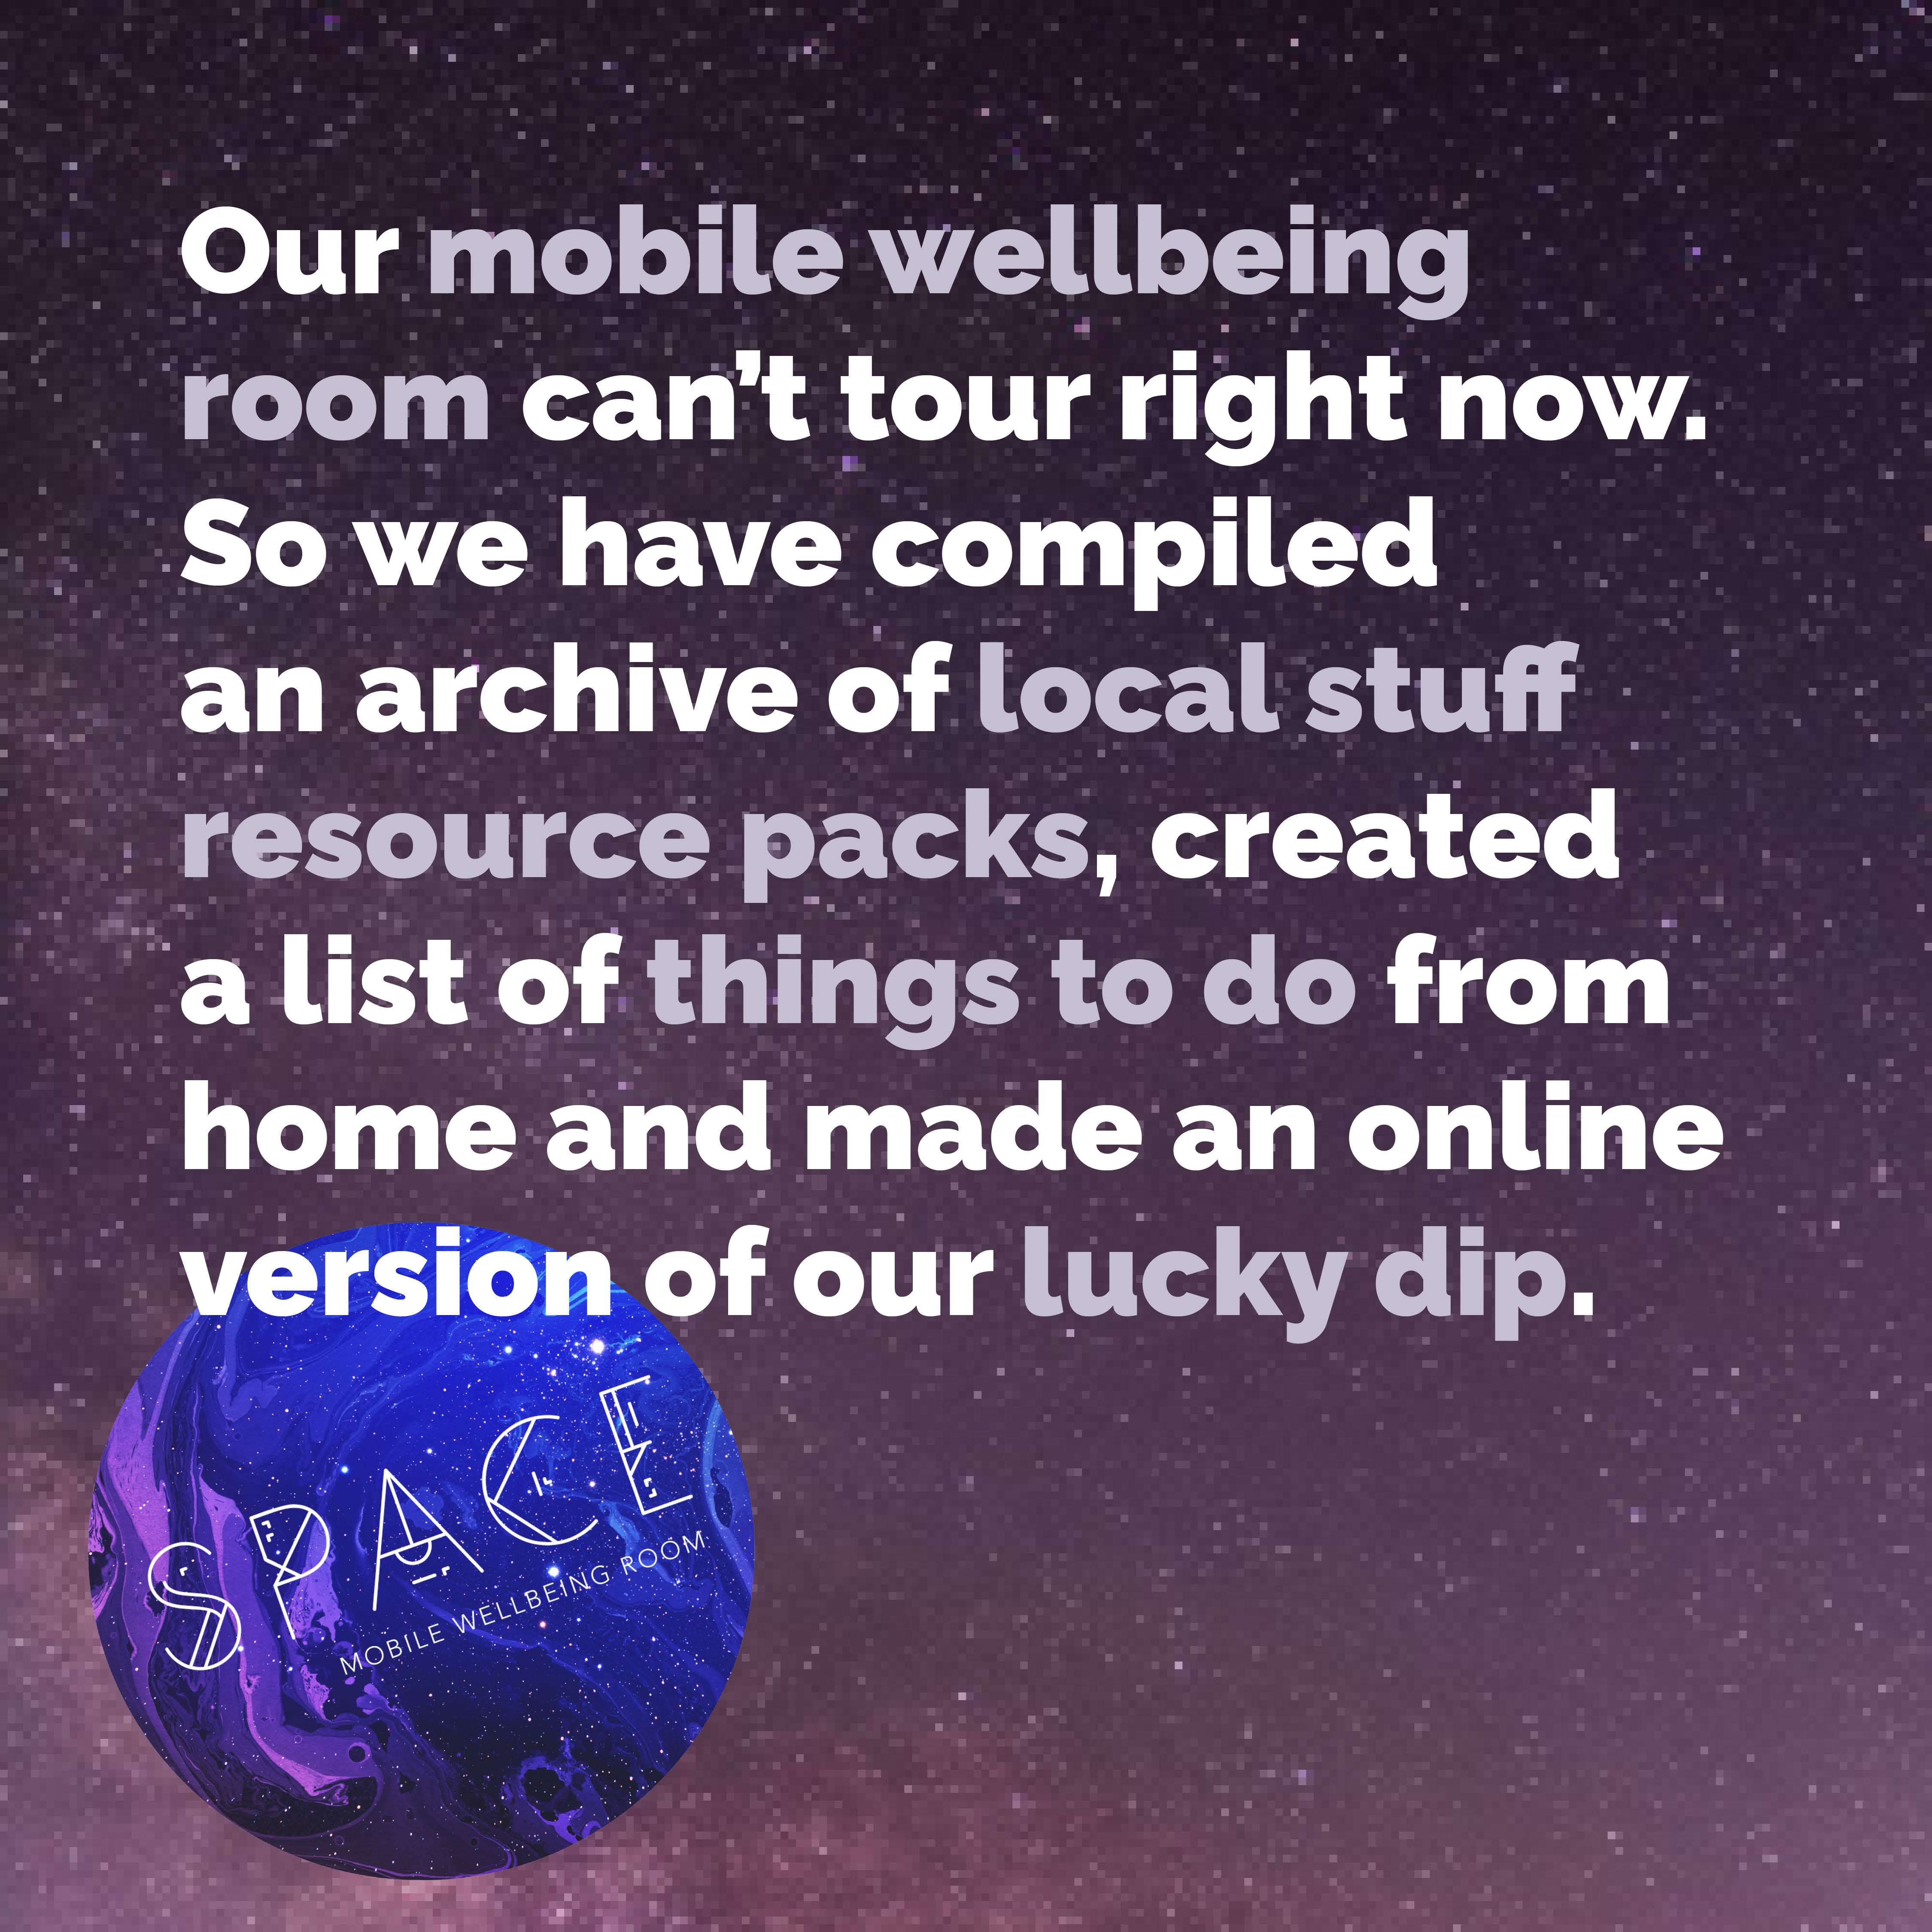 A box that reads "our mobile wellbeing room can't tour right now. So we have compiled an archive of local stuff resource packs, created a list of things to do from home and made an online version of our lucky dip"